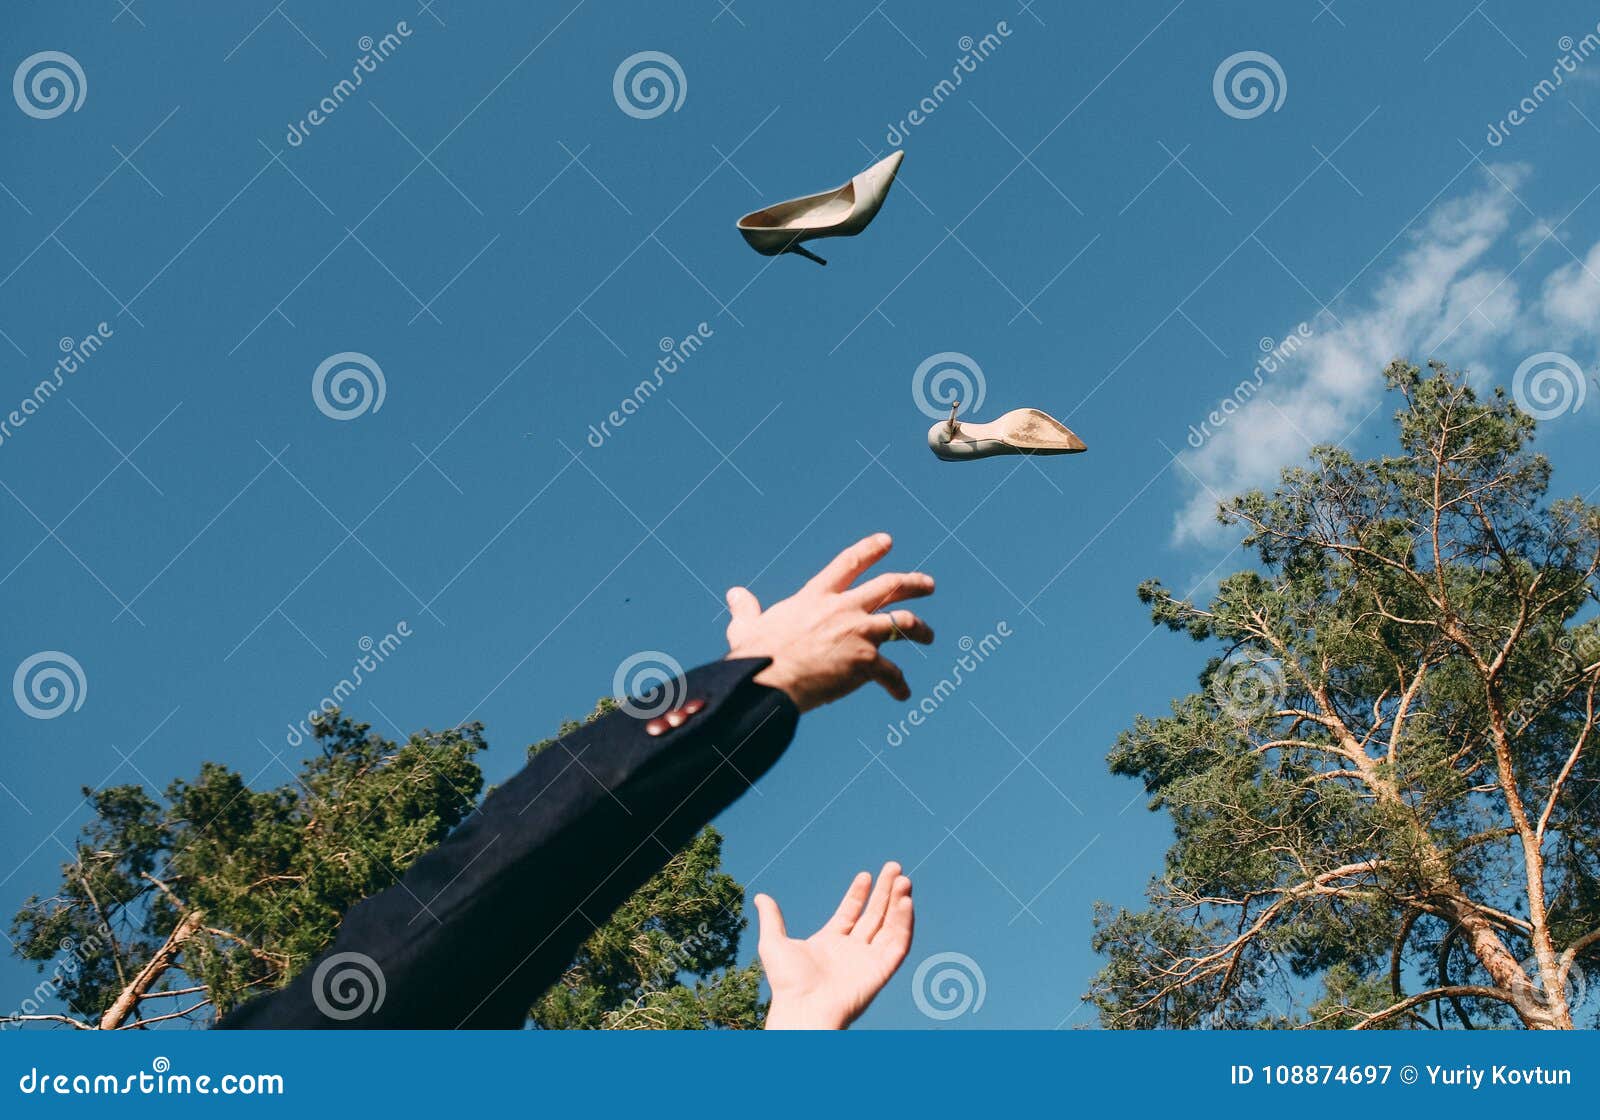 Man Suit Tossed Bride S Shoes To Sky Catches His Hands Man Throwing His Shoes Up Catches His Hands Sky 108874697 